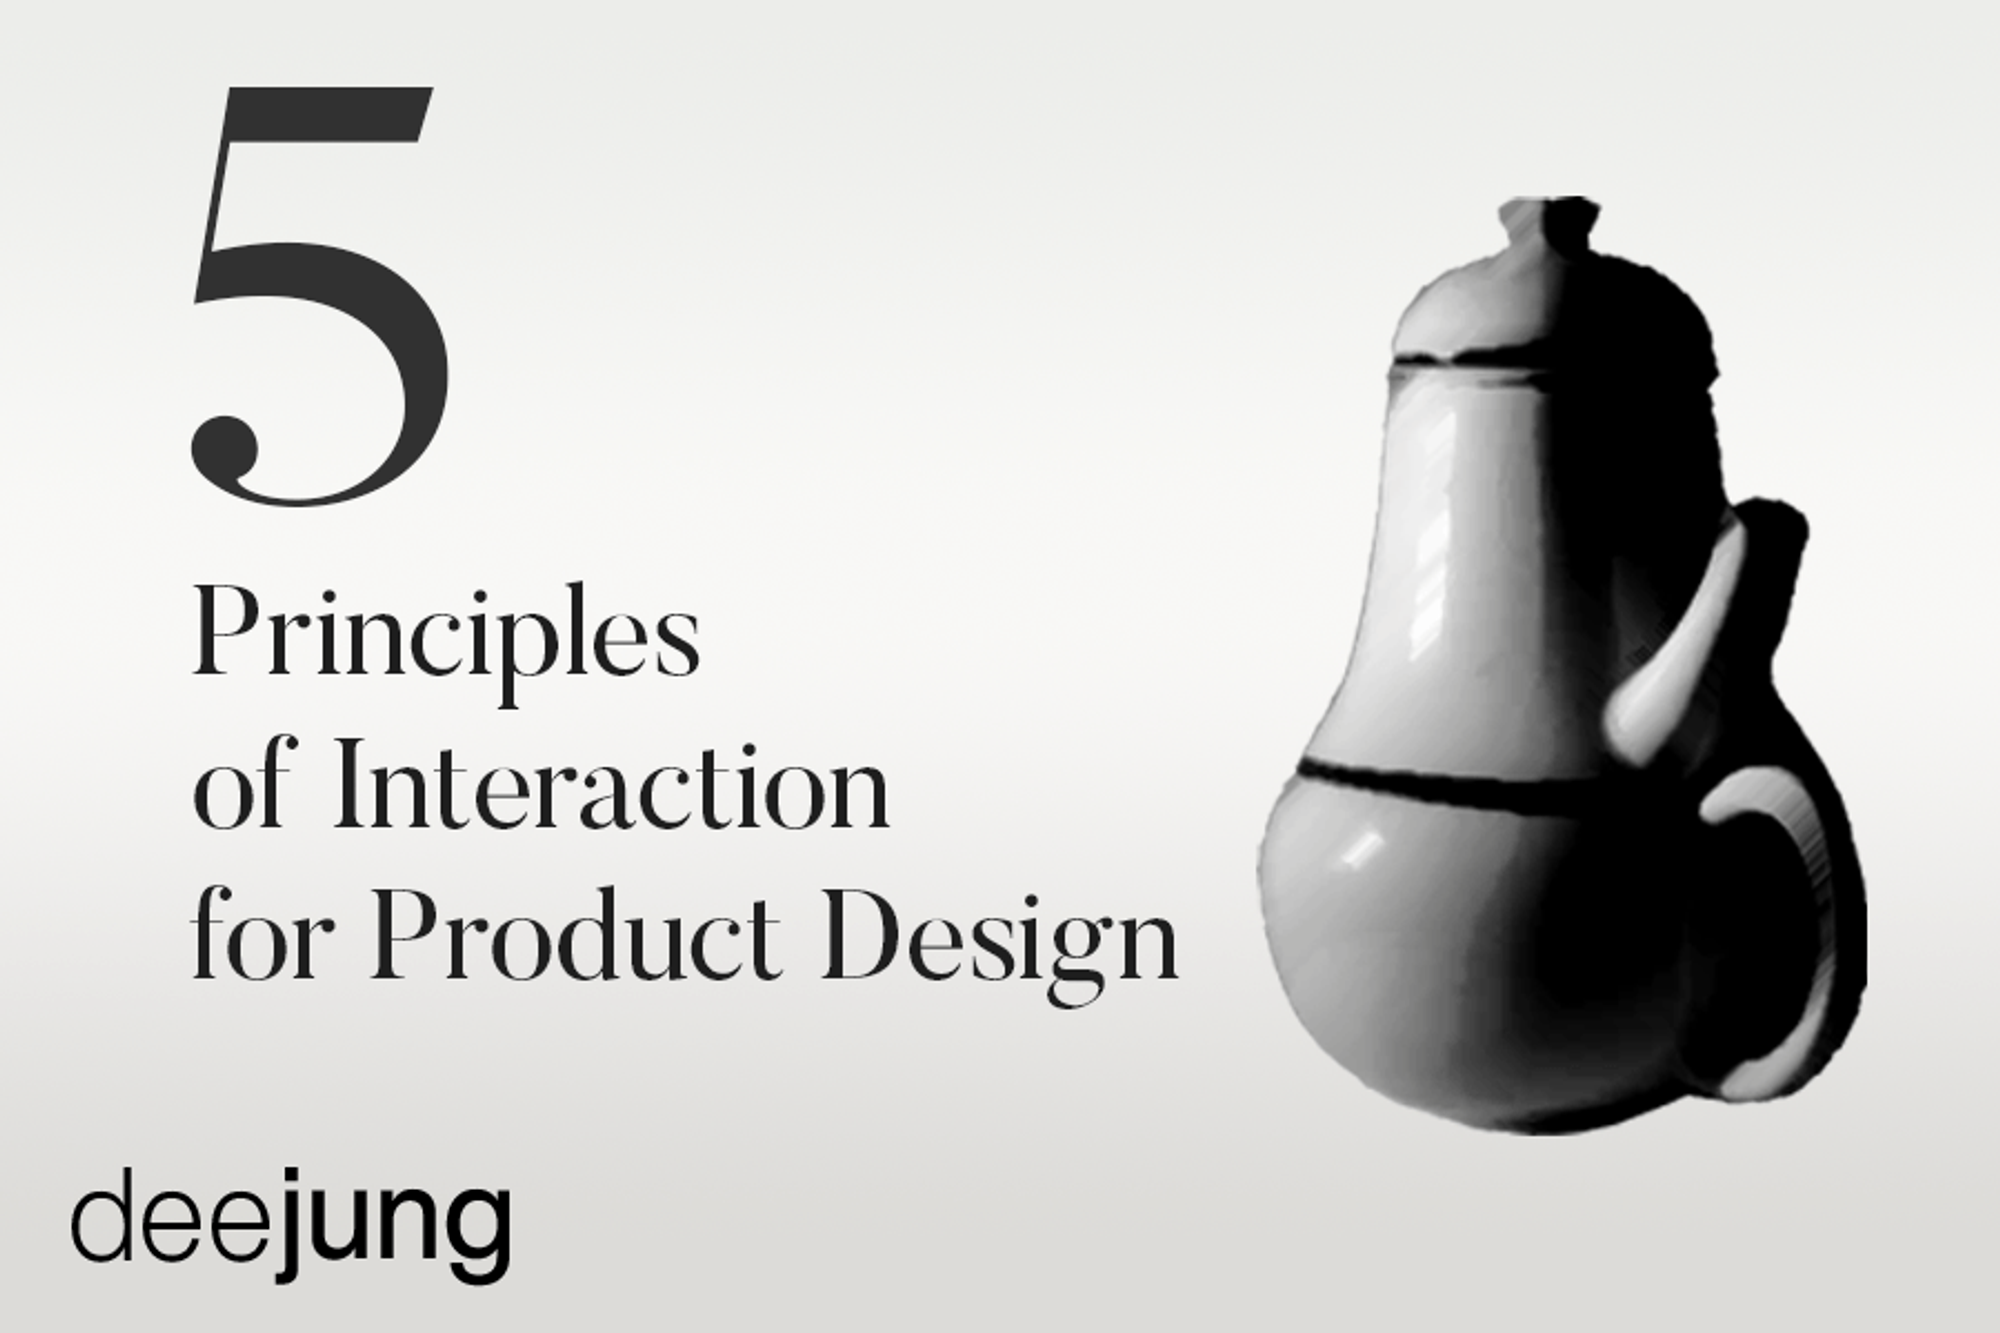 Principles of Interaction in Product Design